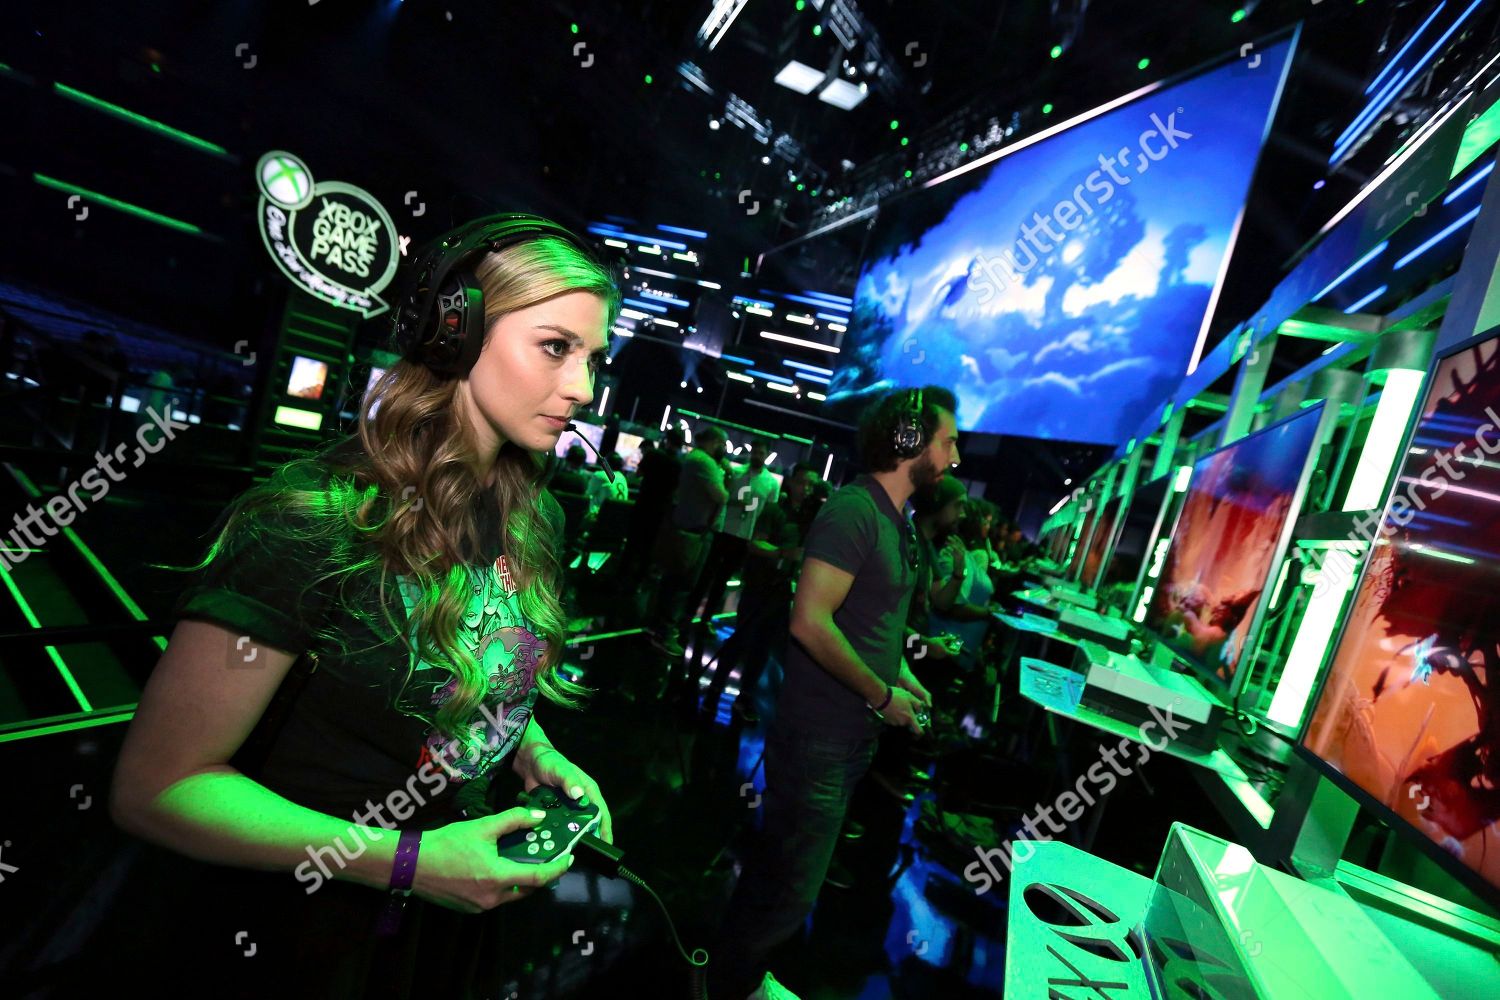 xbox-e3-2018-briefing-fanfest-and-showcase-event-los-angeles-usa-shutterstock-editorial-9709318a.jpg